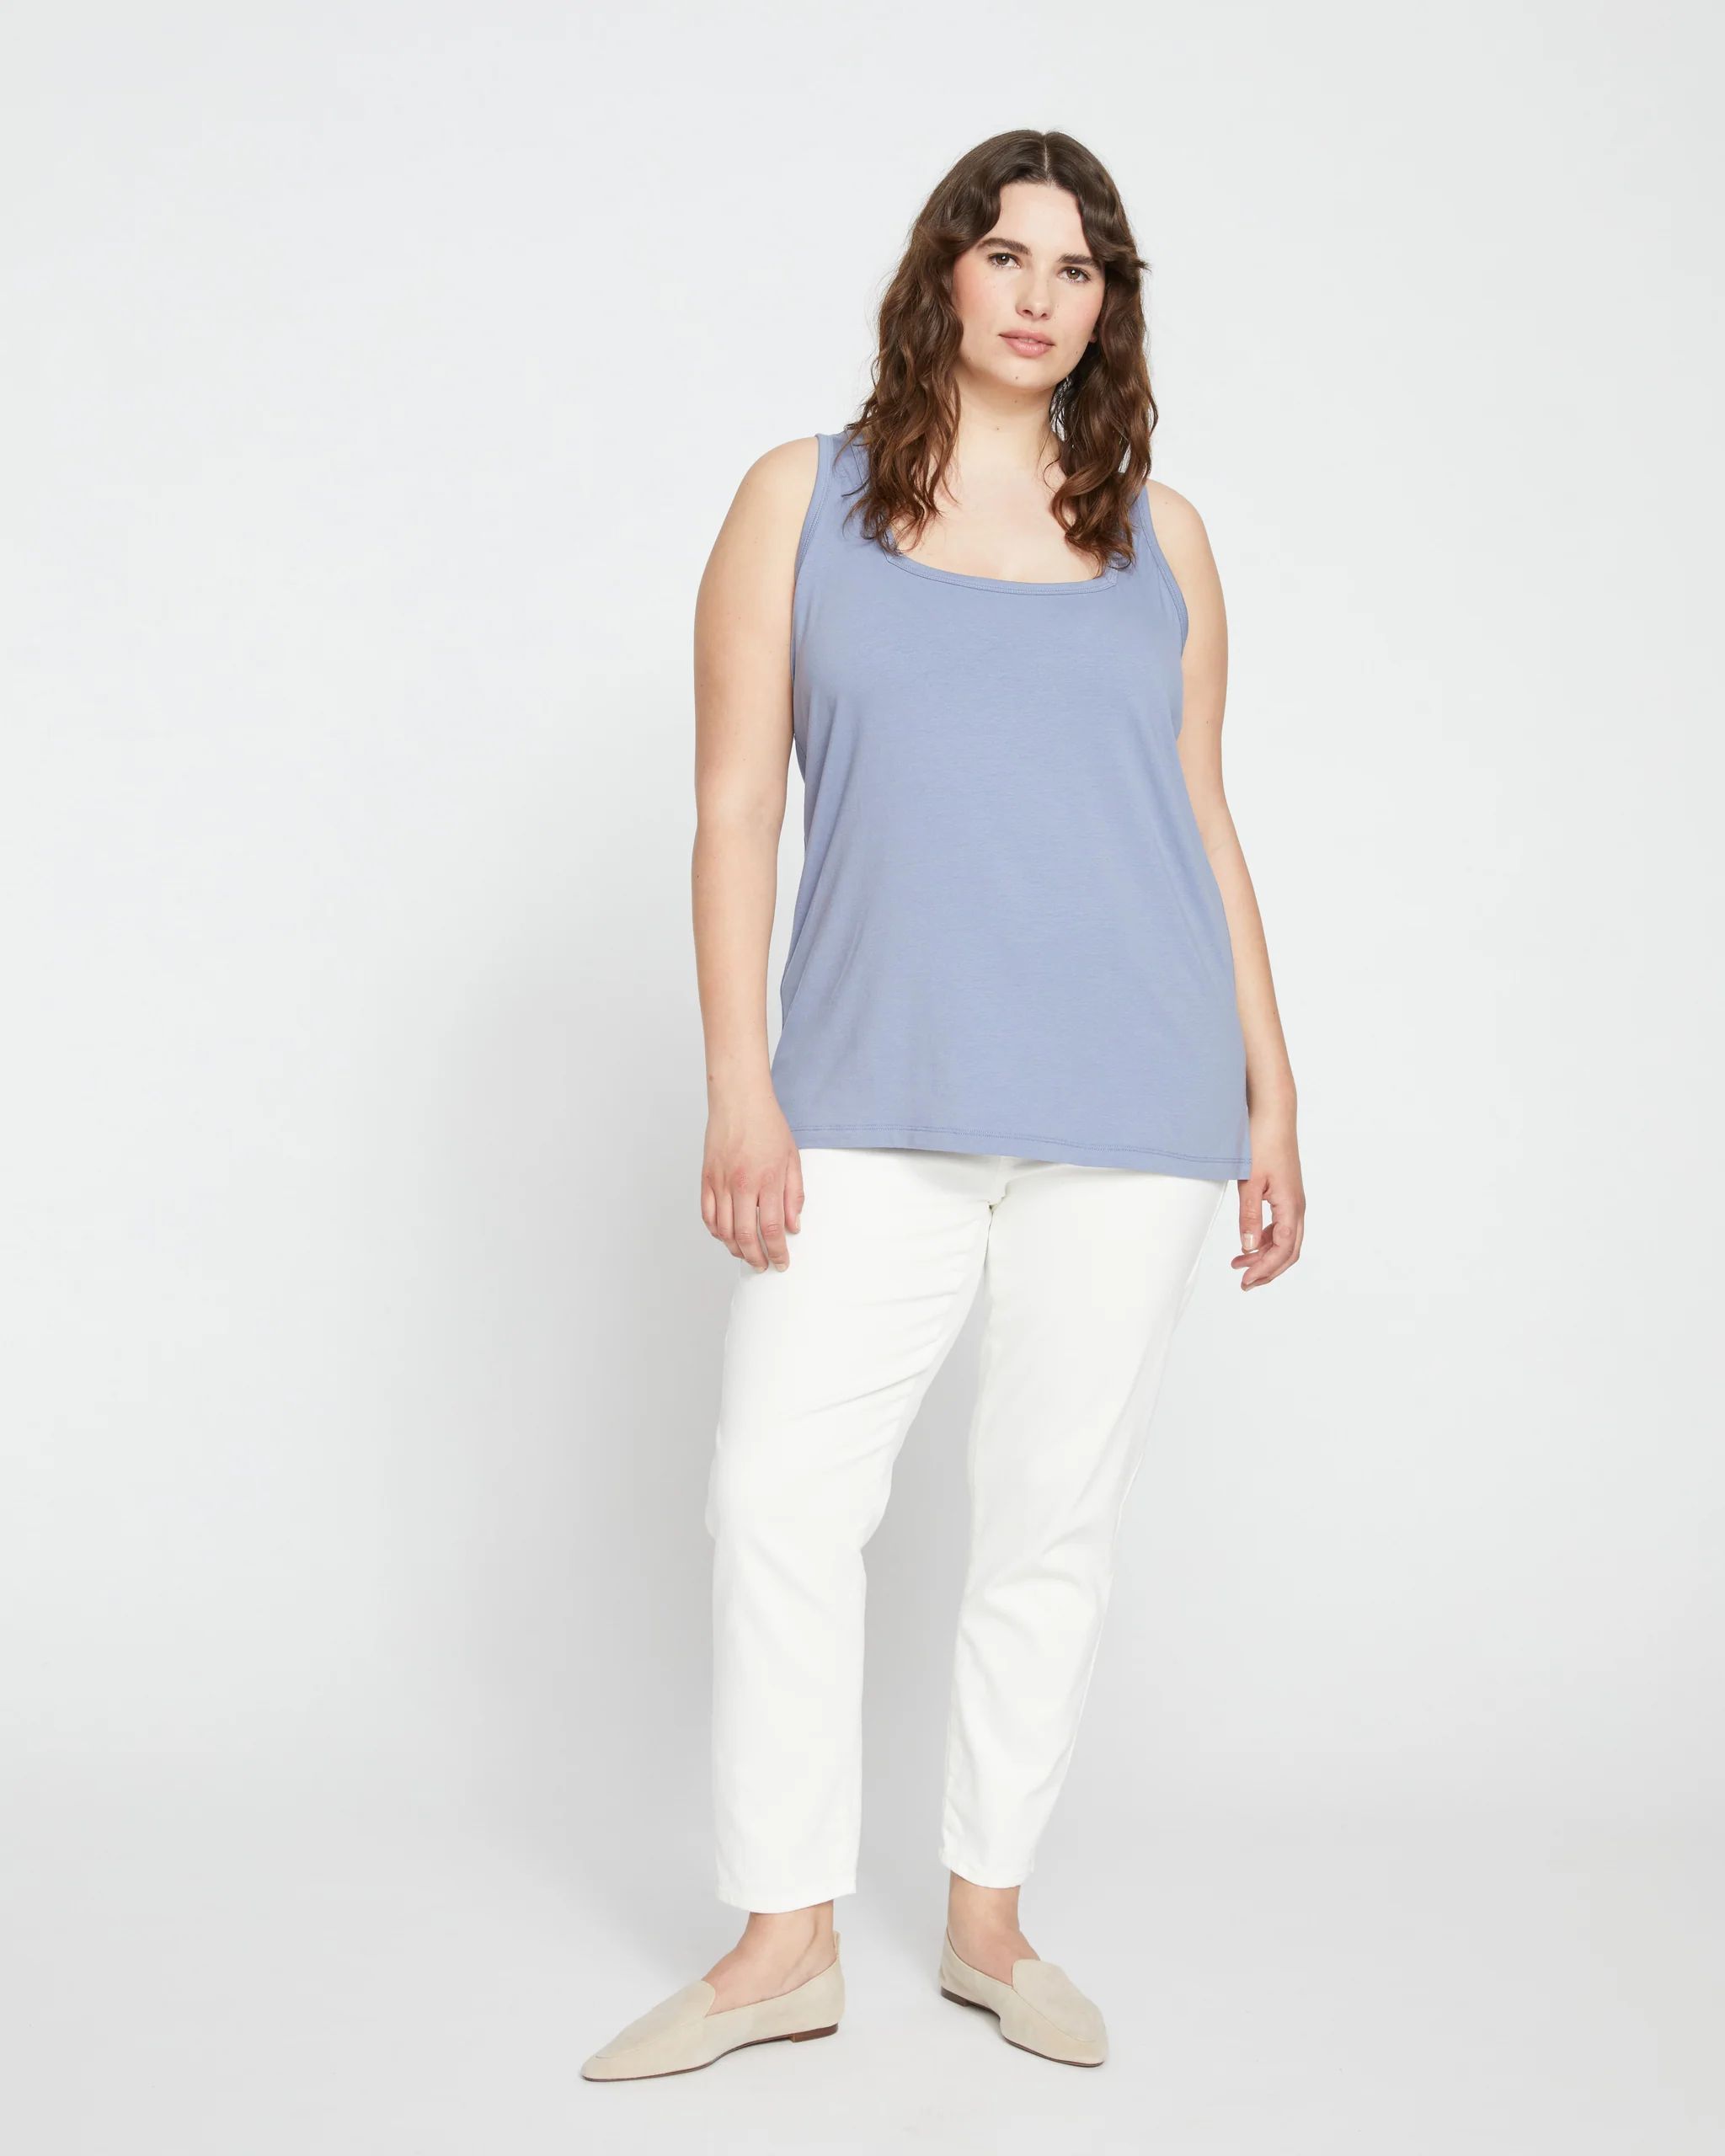 Square Neck Tank Top - Pressed Pansy | Universal Standard